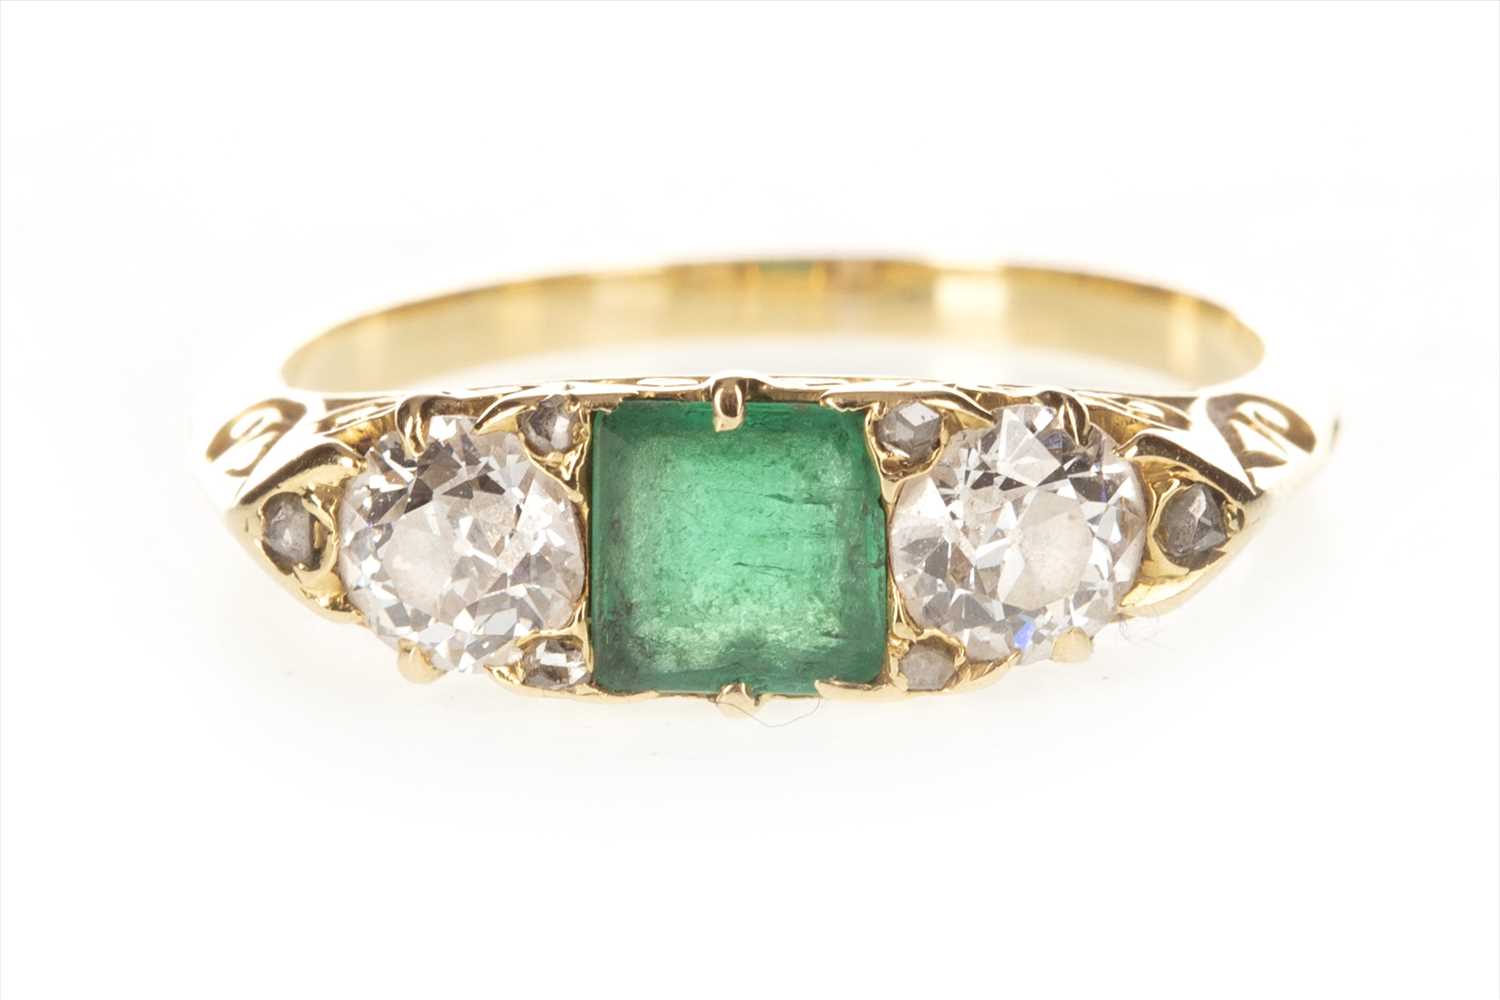 Lot 364 - A LATE VICTORIAN GREEN GEM AND DIAMOND RING